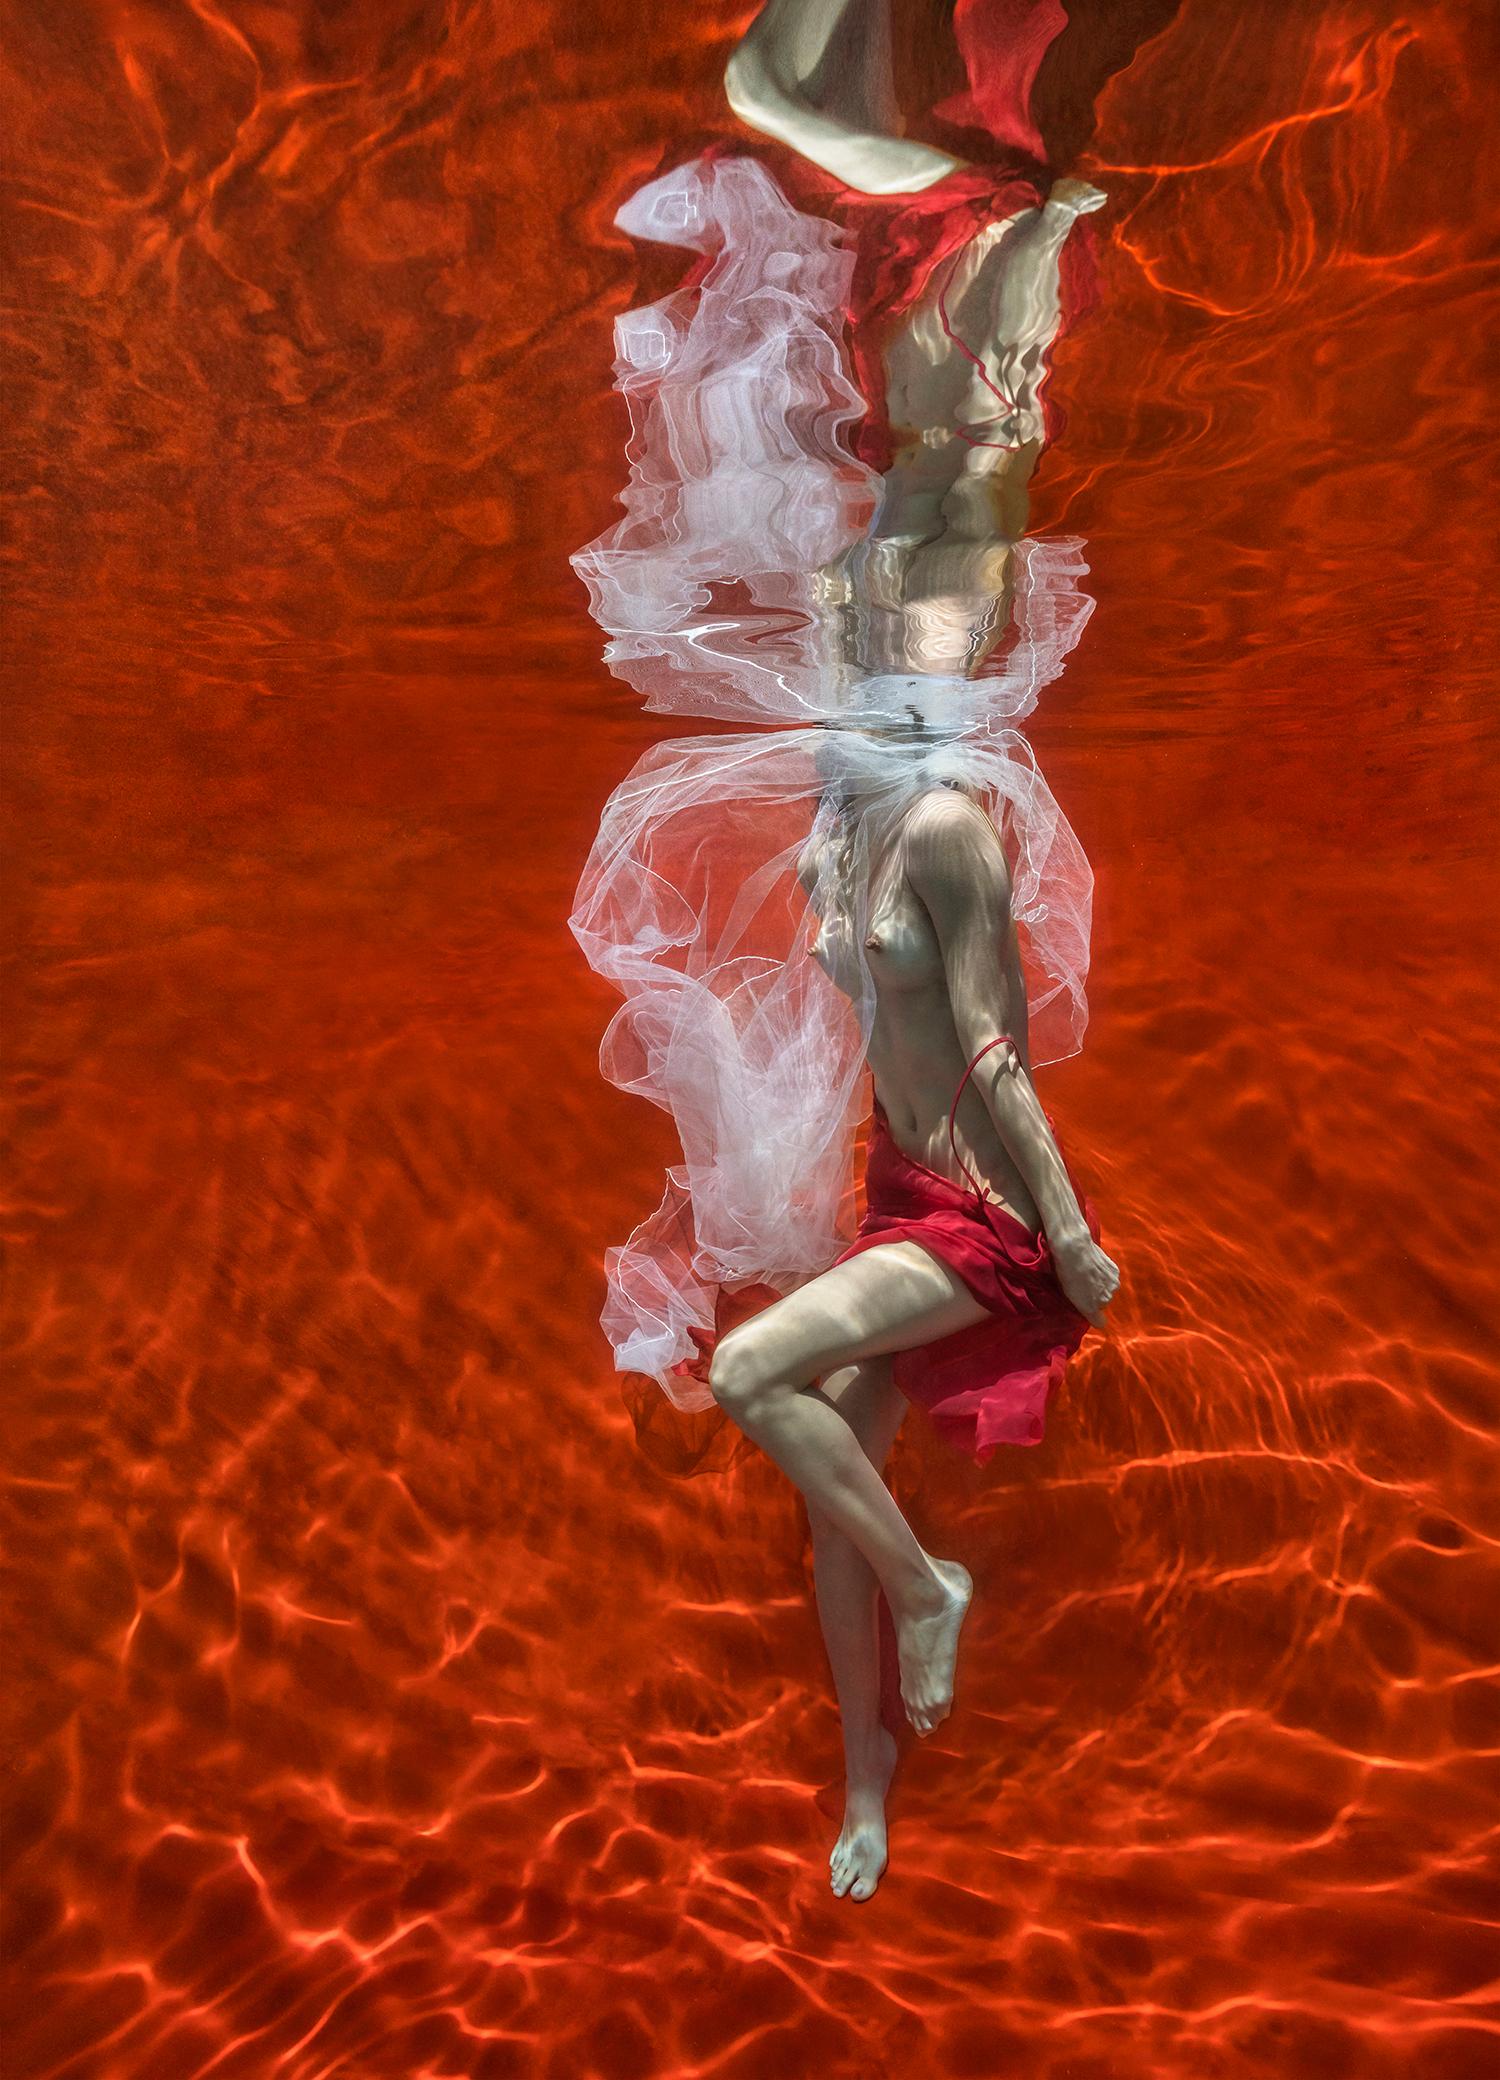 Alex Sher Color Photograph - Blood and Milk III - underwater nude photograph - print on paper 48 x 35"